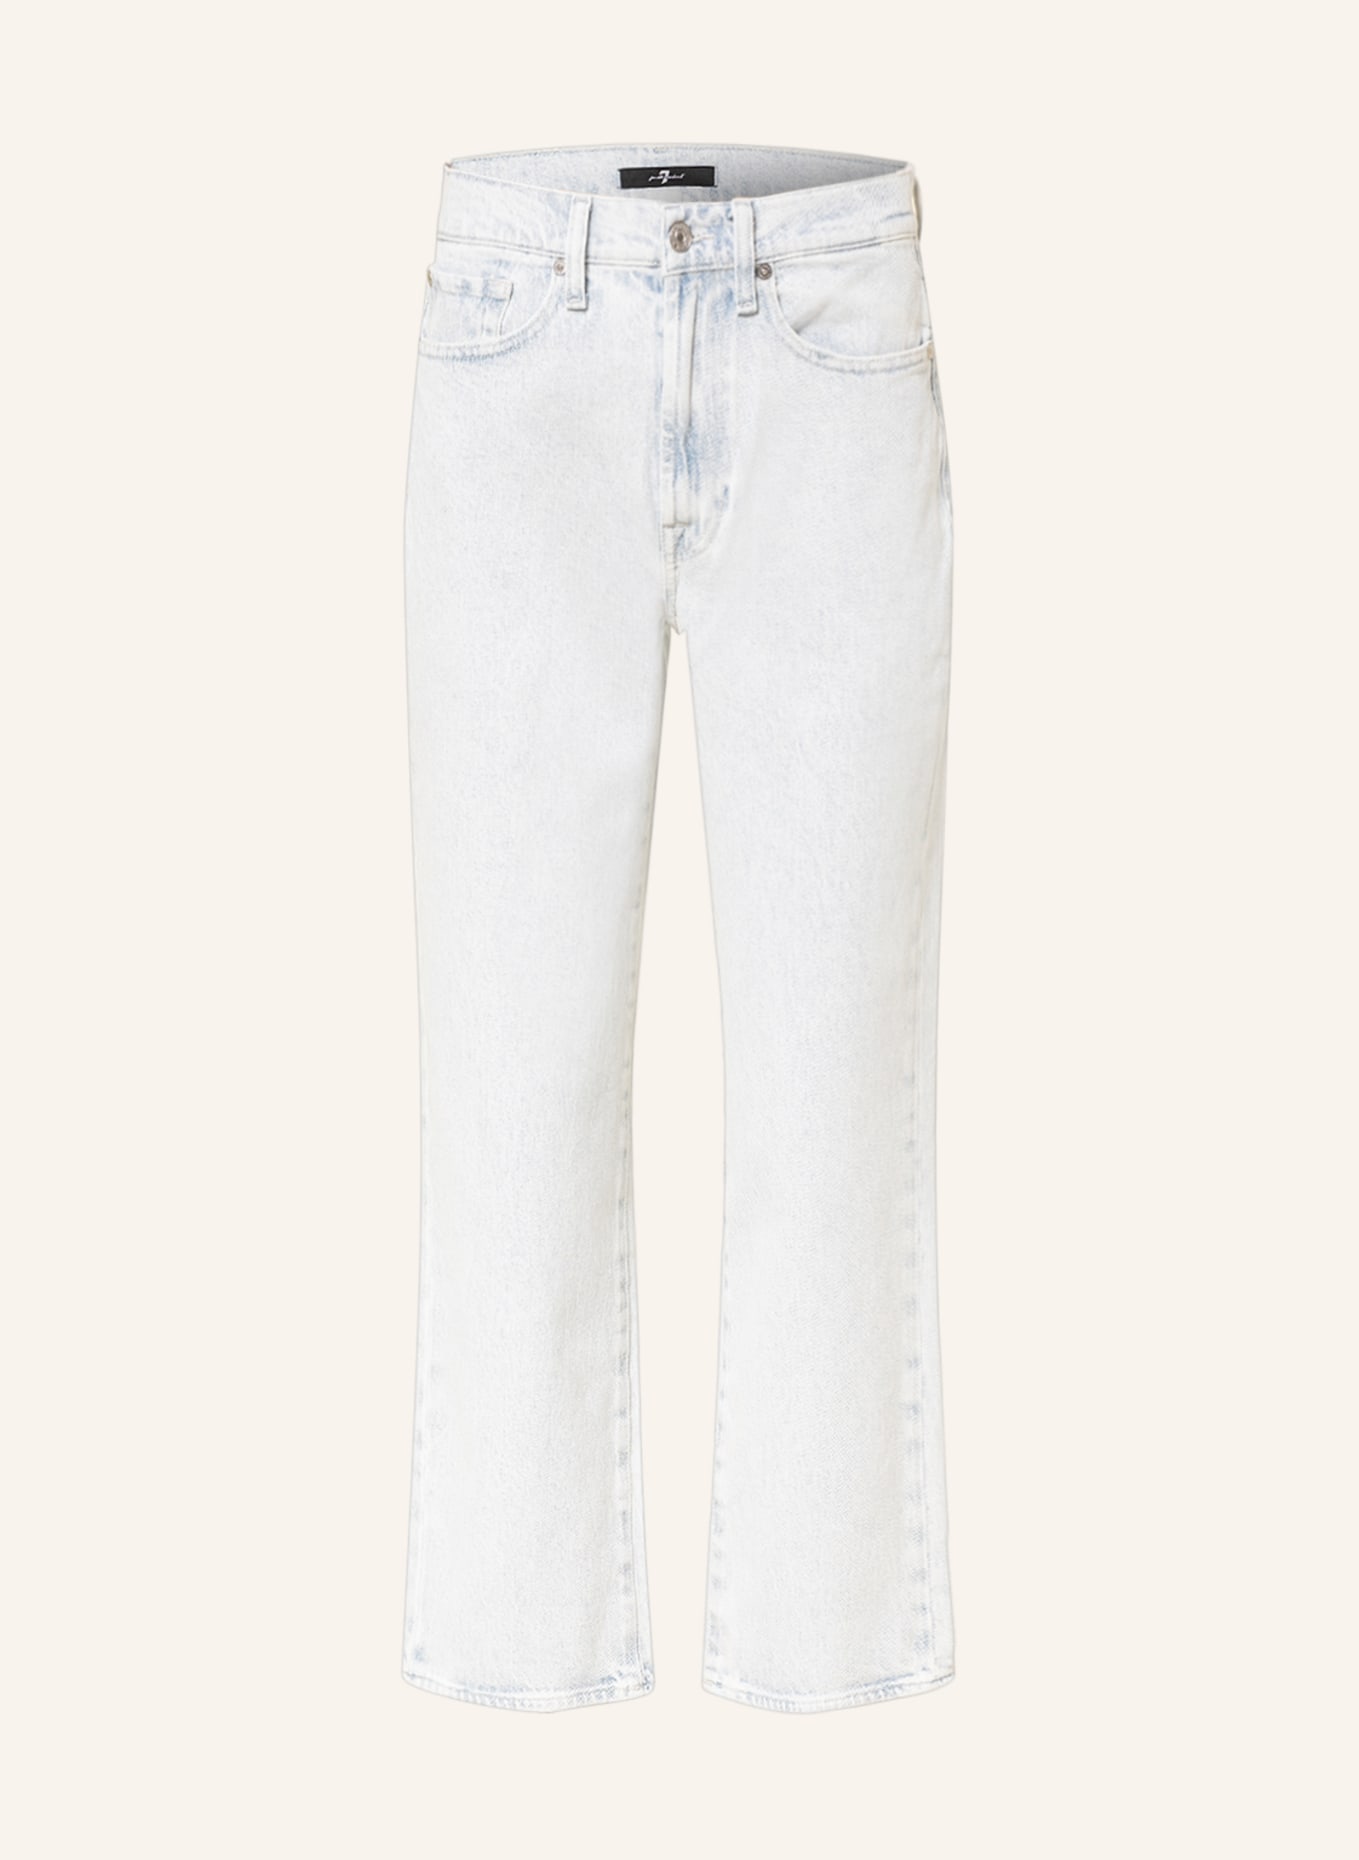 7 for all mankind Jeans-Culotte, Farbe: IP LIGHT BLUE (Bild 1)